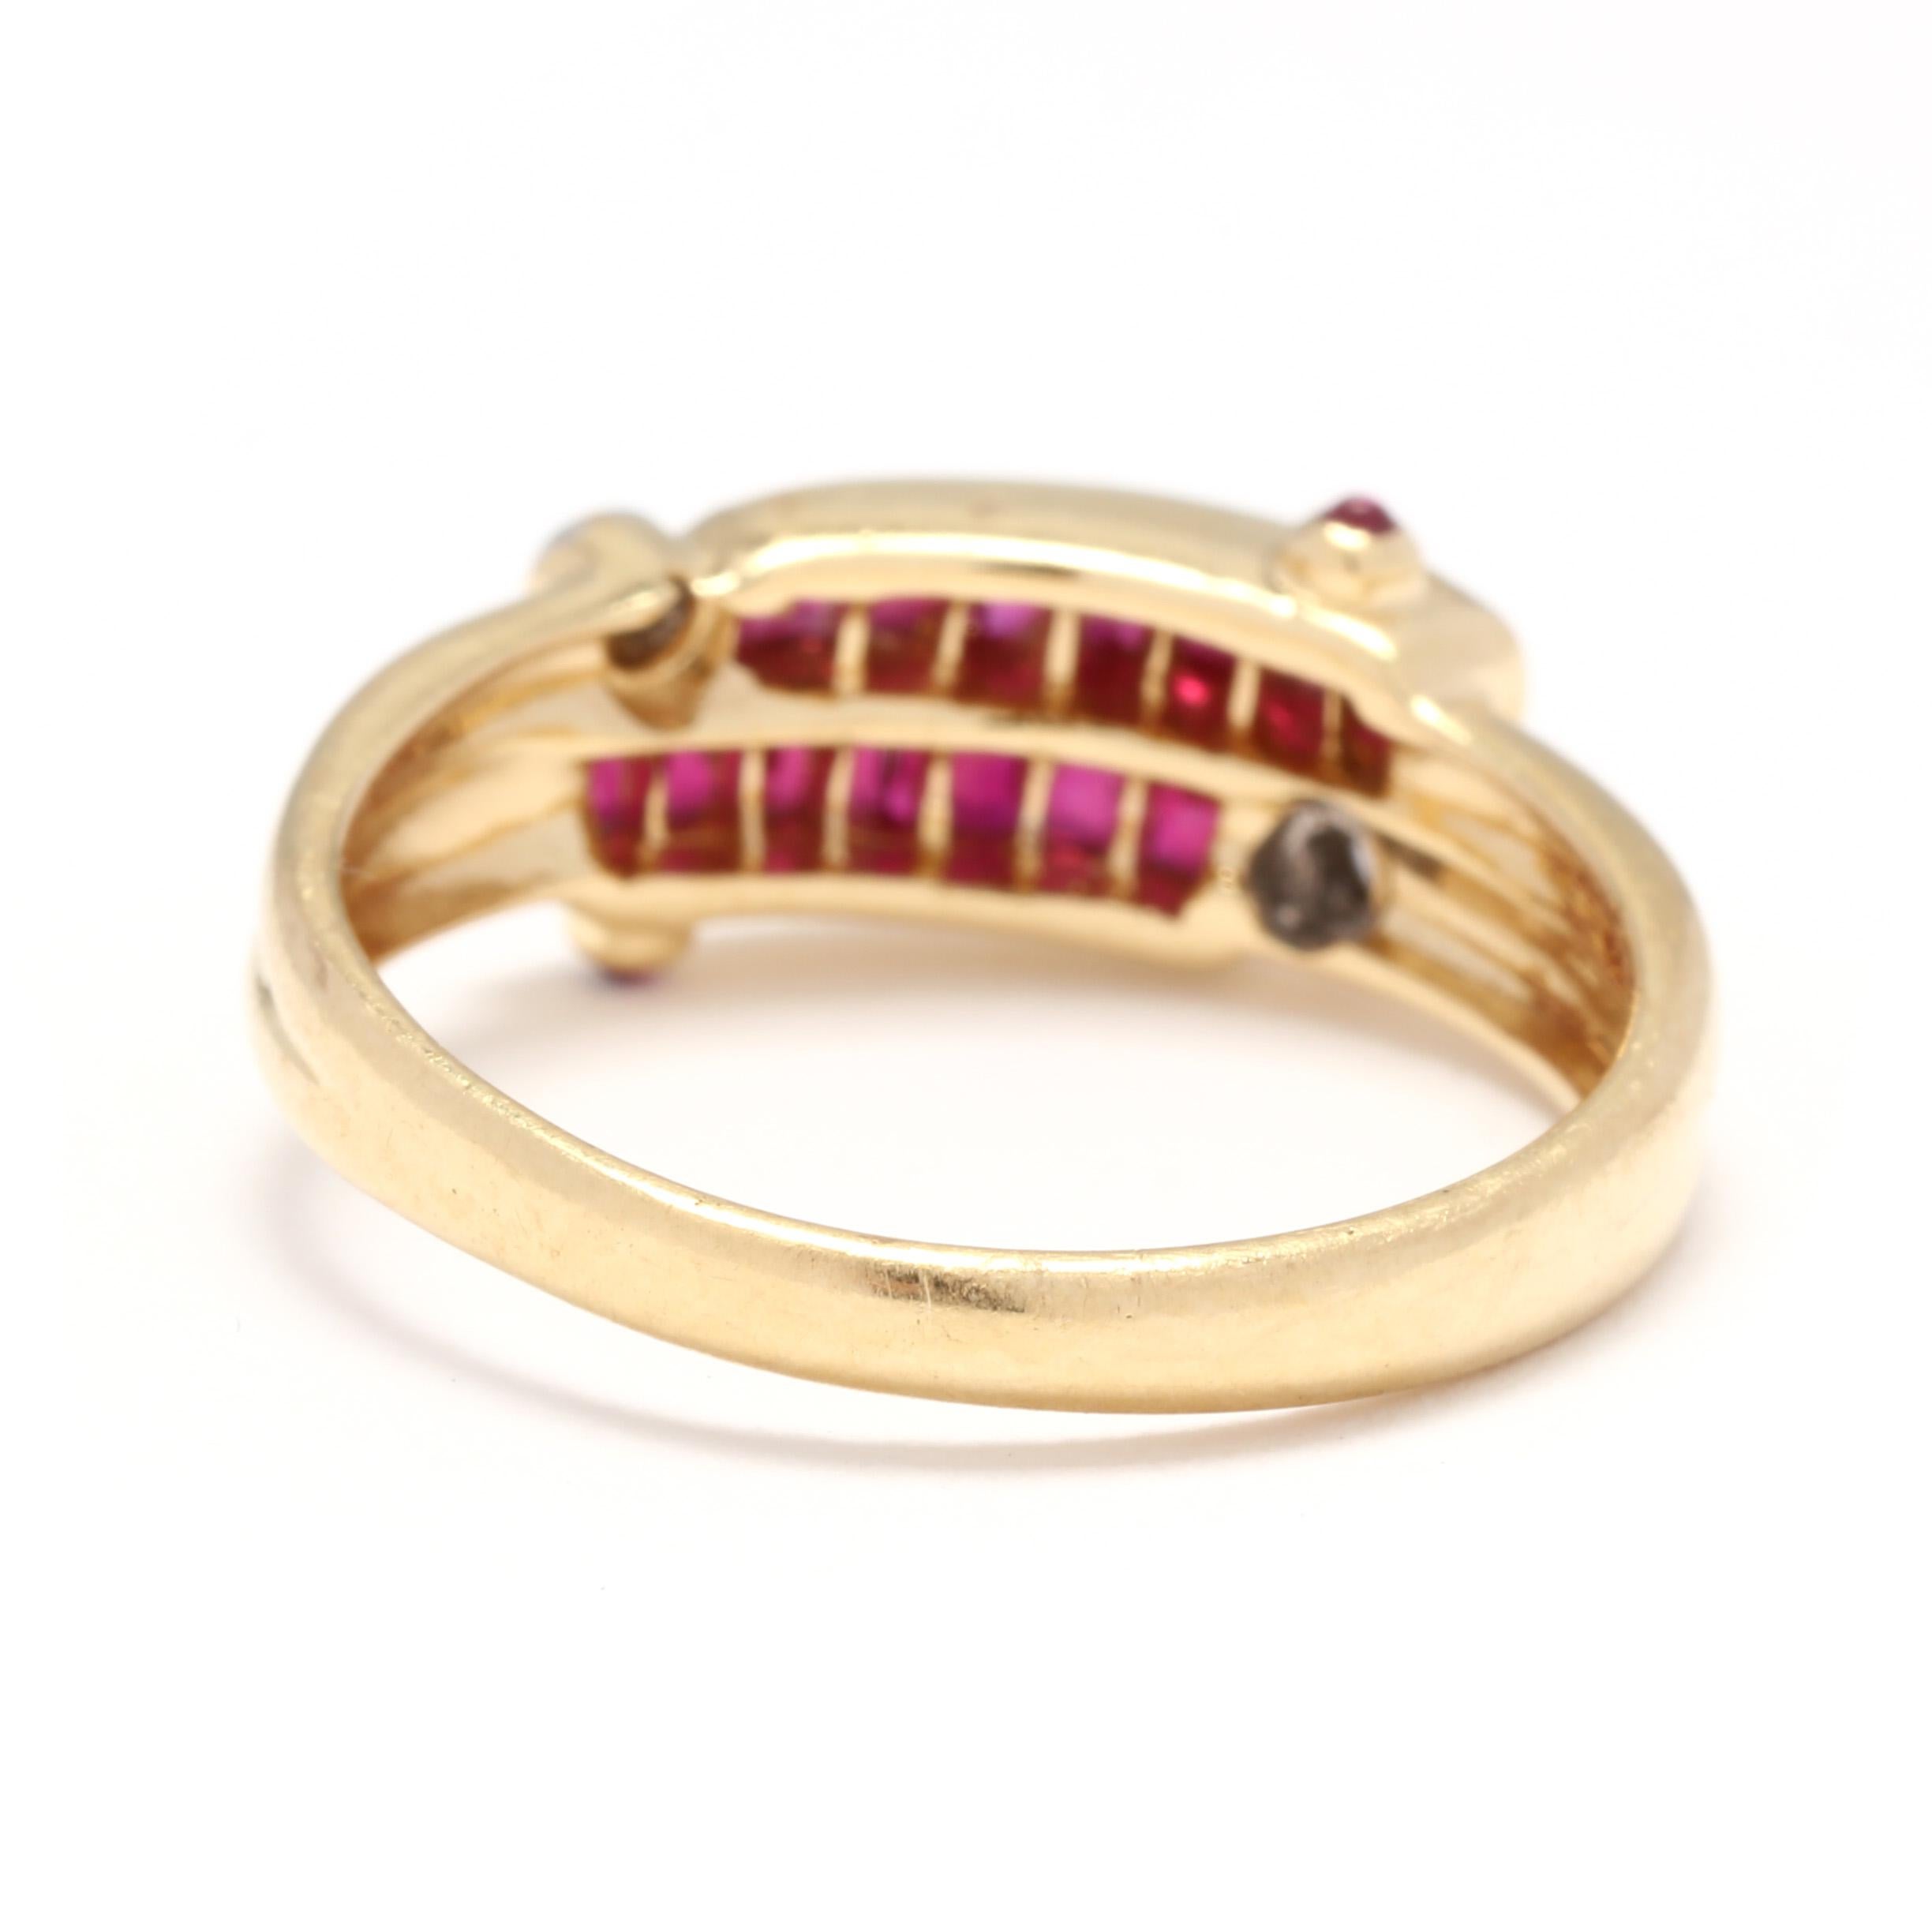 Square Cut Ruby Diamond Bypass Band Ring, 18KT Yellow Gold, Ring